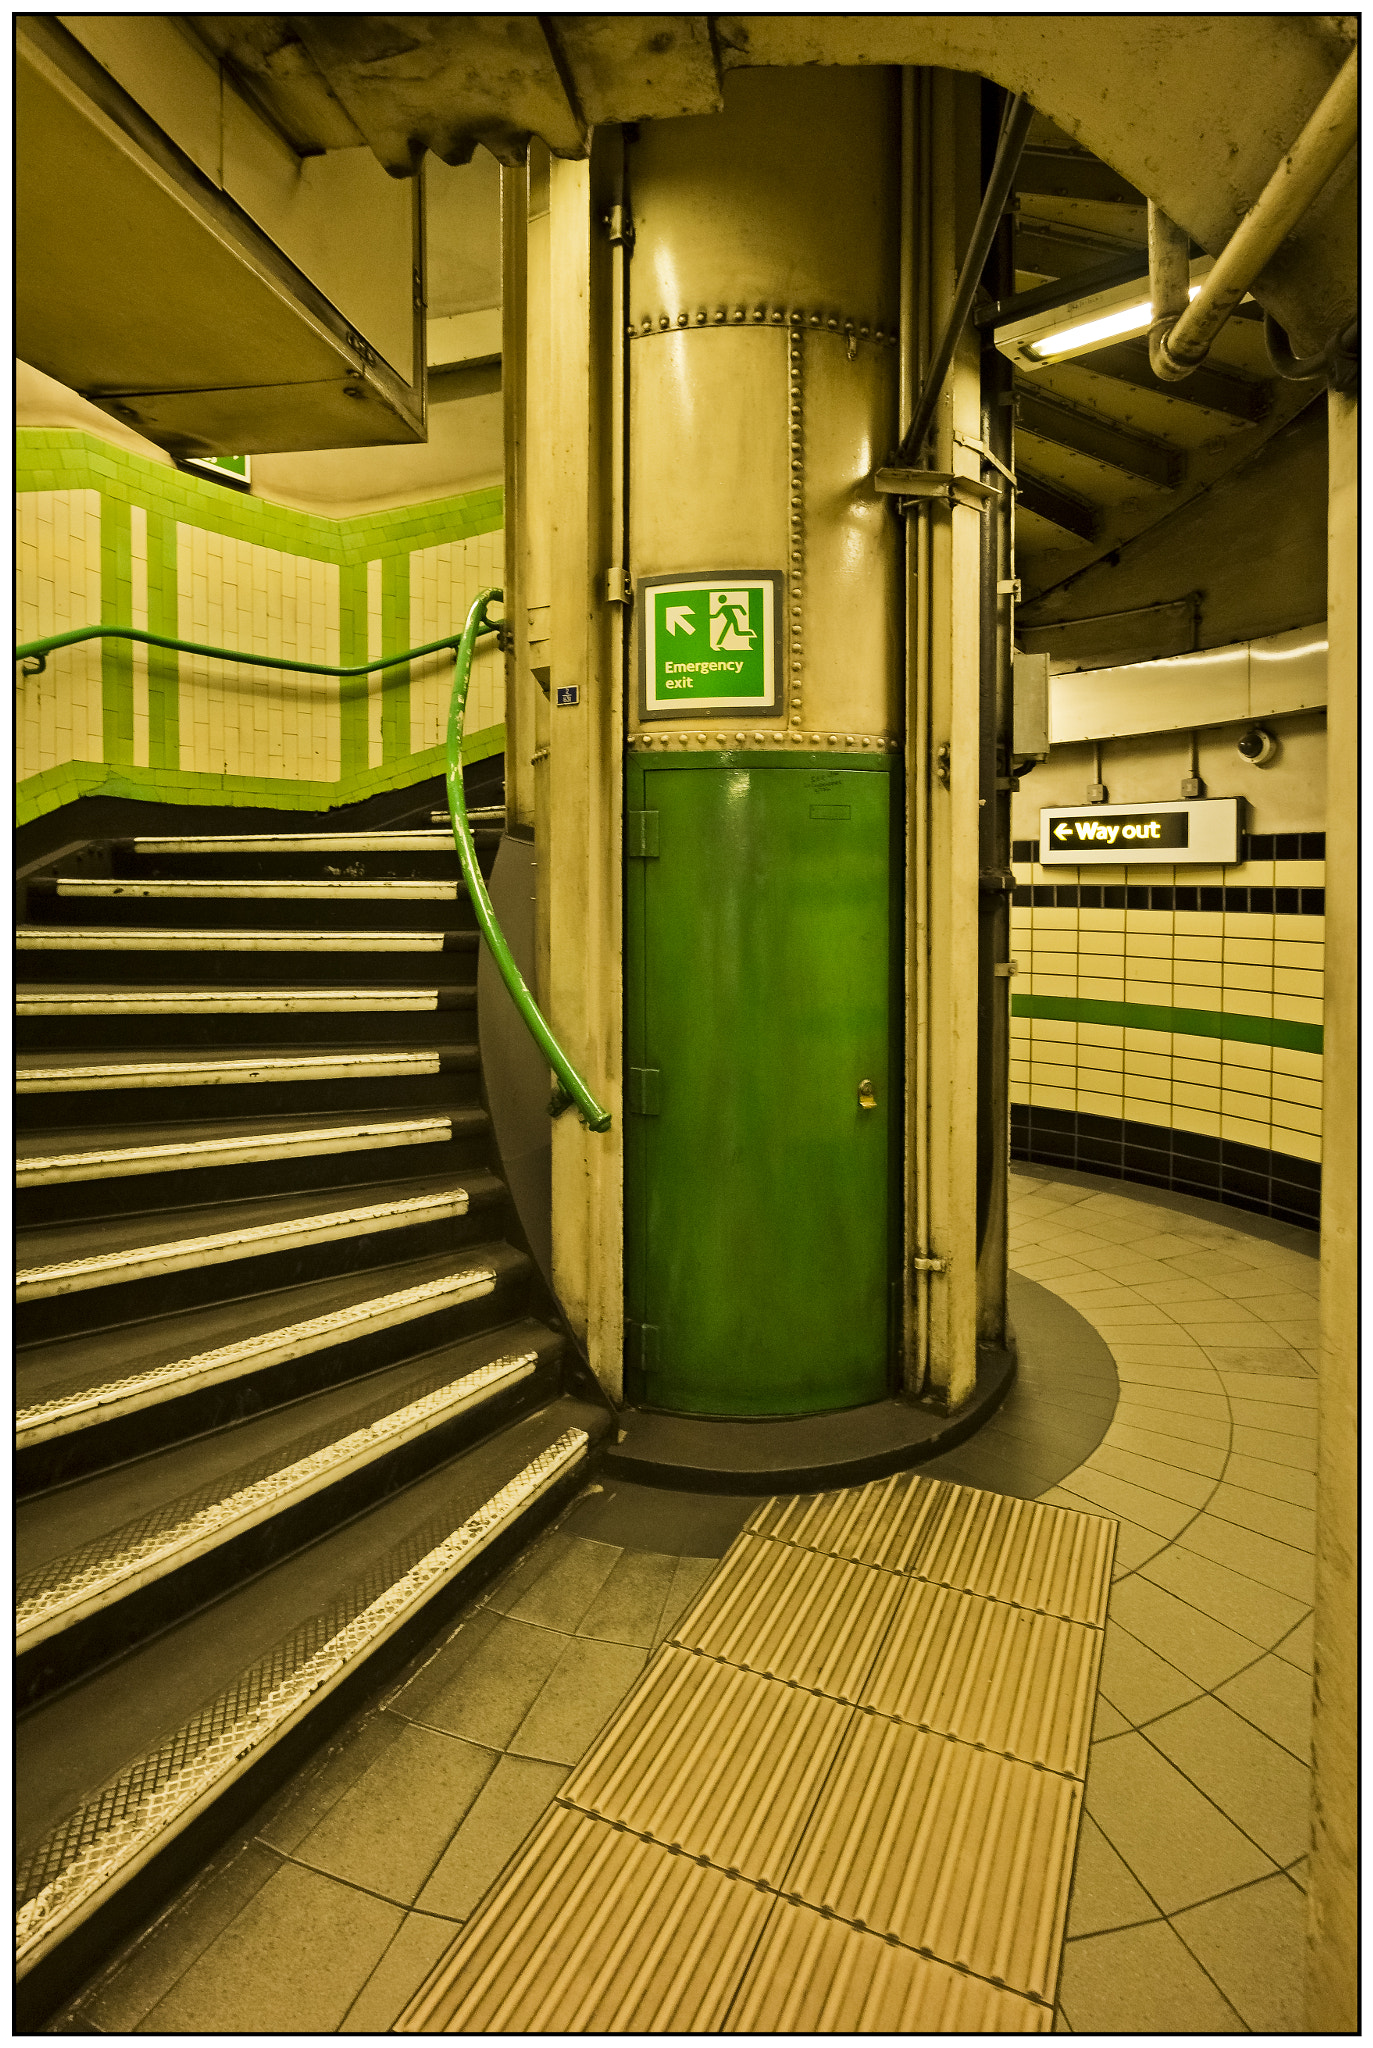 Canon EOS M sample photo. Way out, goodge street underground station, london photography